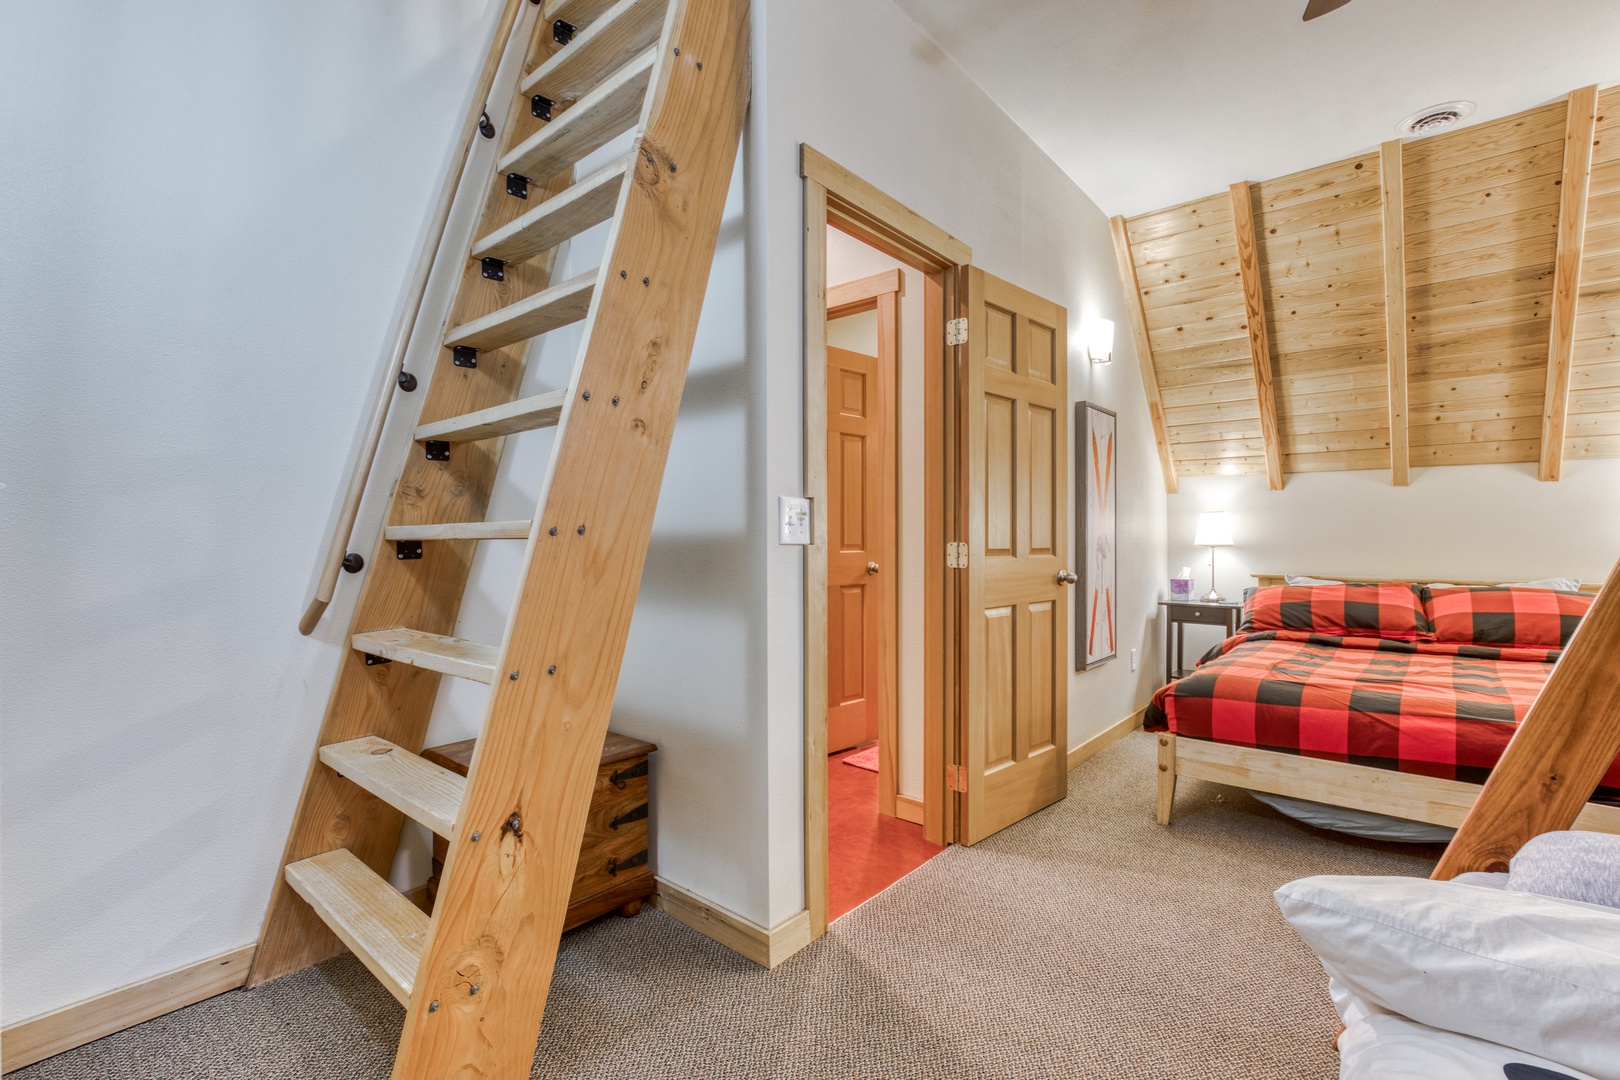 Government Camp Vacation Rentals, Glade Trail Lodge - Area upstairs before the loft has a queen bed plus a bunk bed